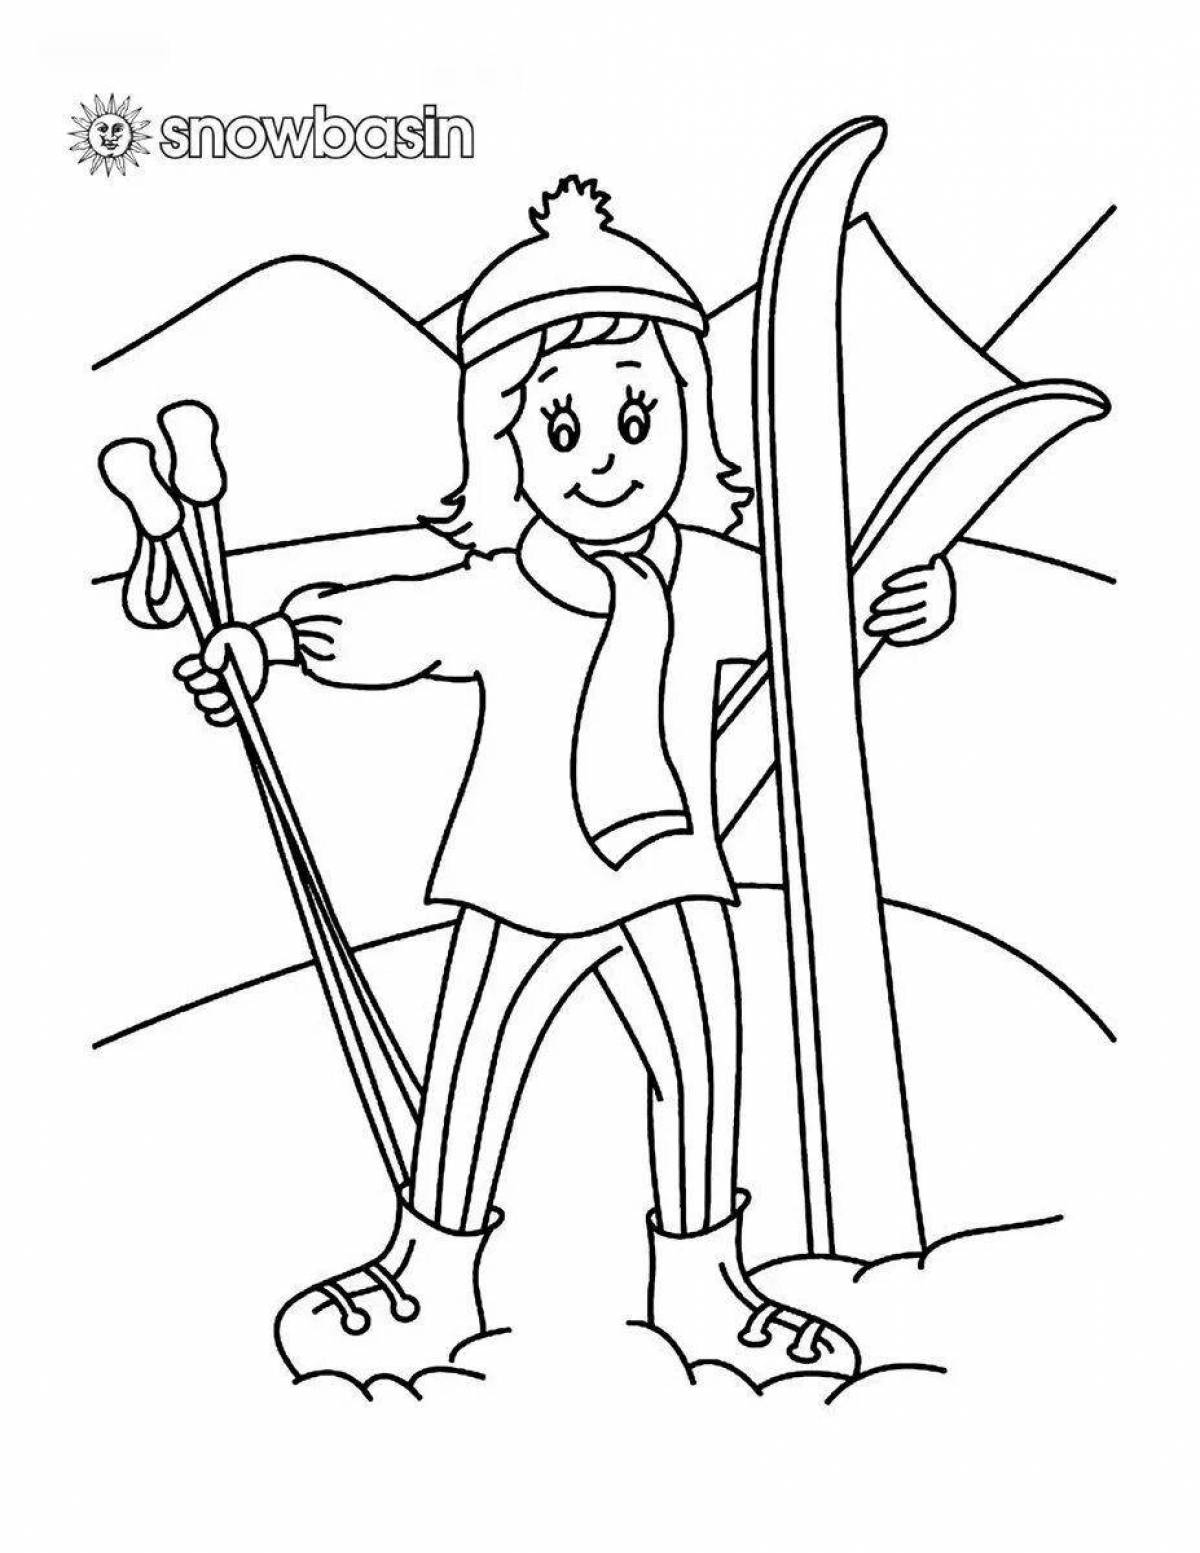 Skier coloring book for kids